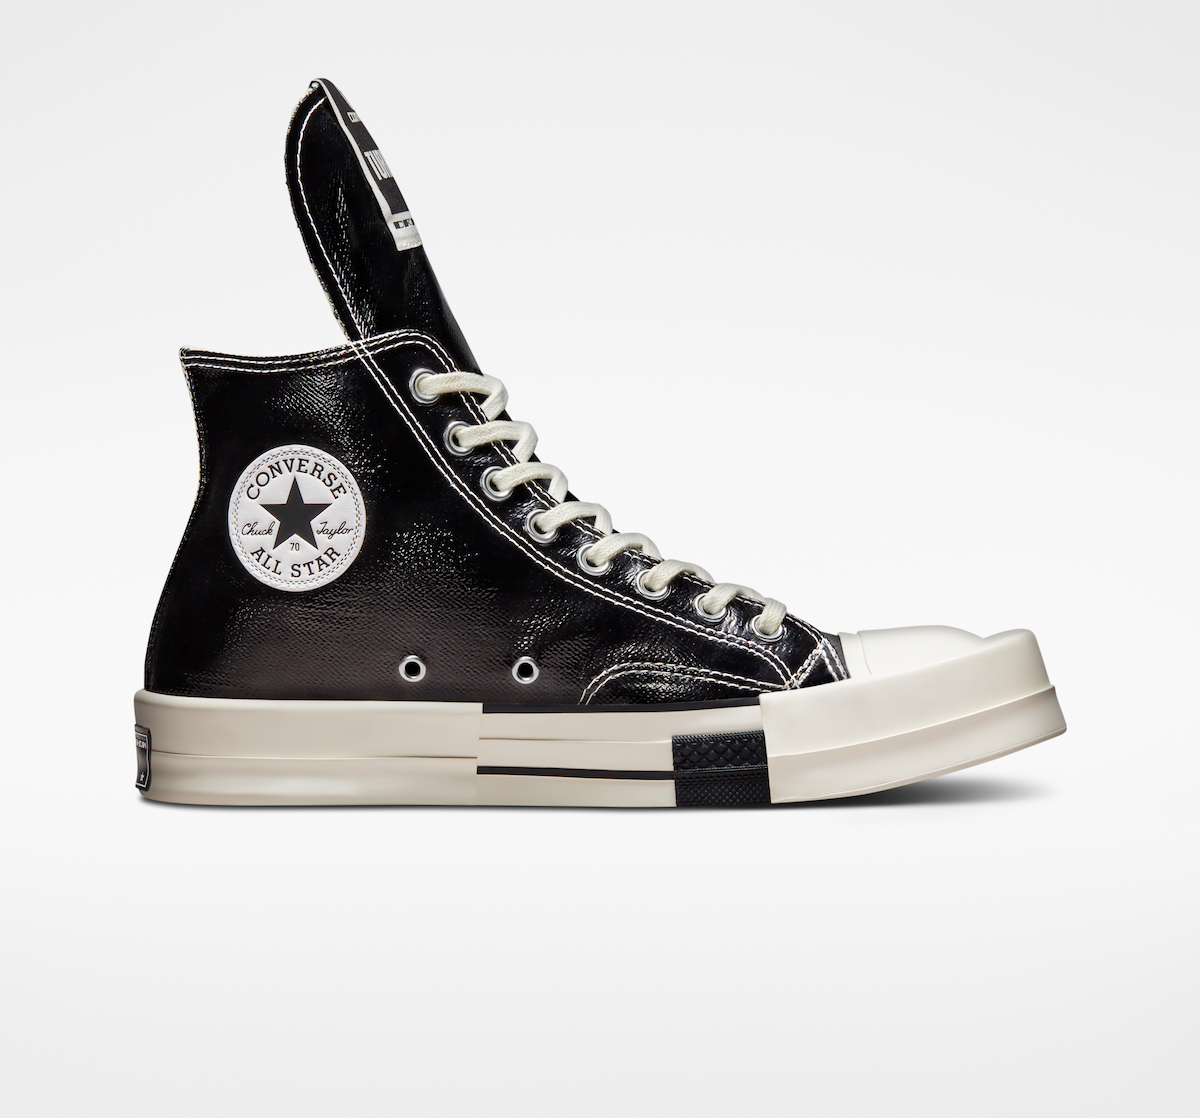 Converse x Rick Owens TURBODRK Chuck 70 Gets Shiny for 2022